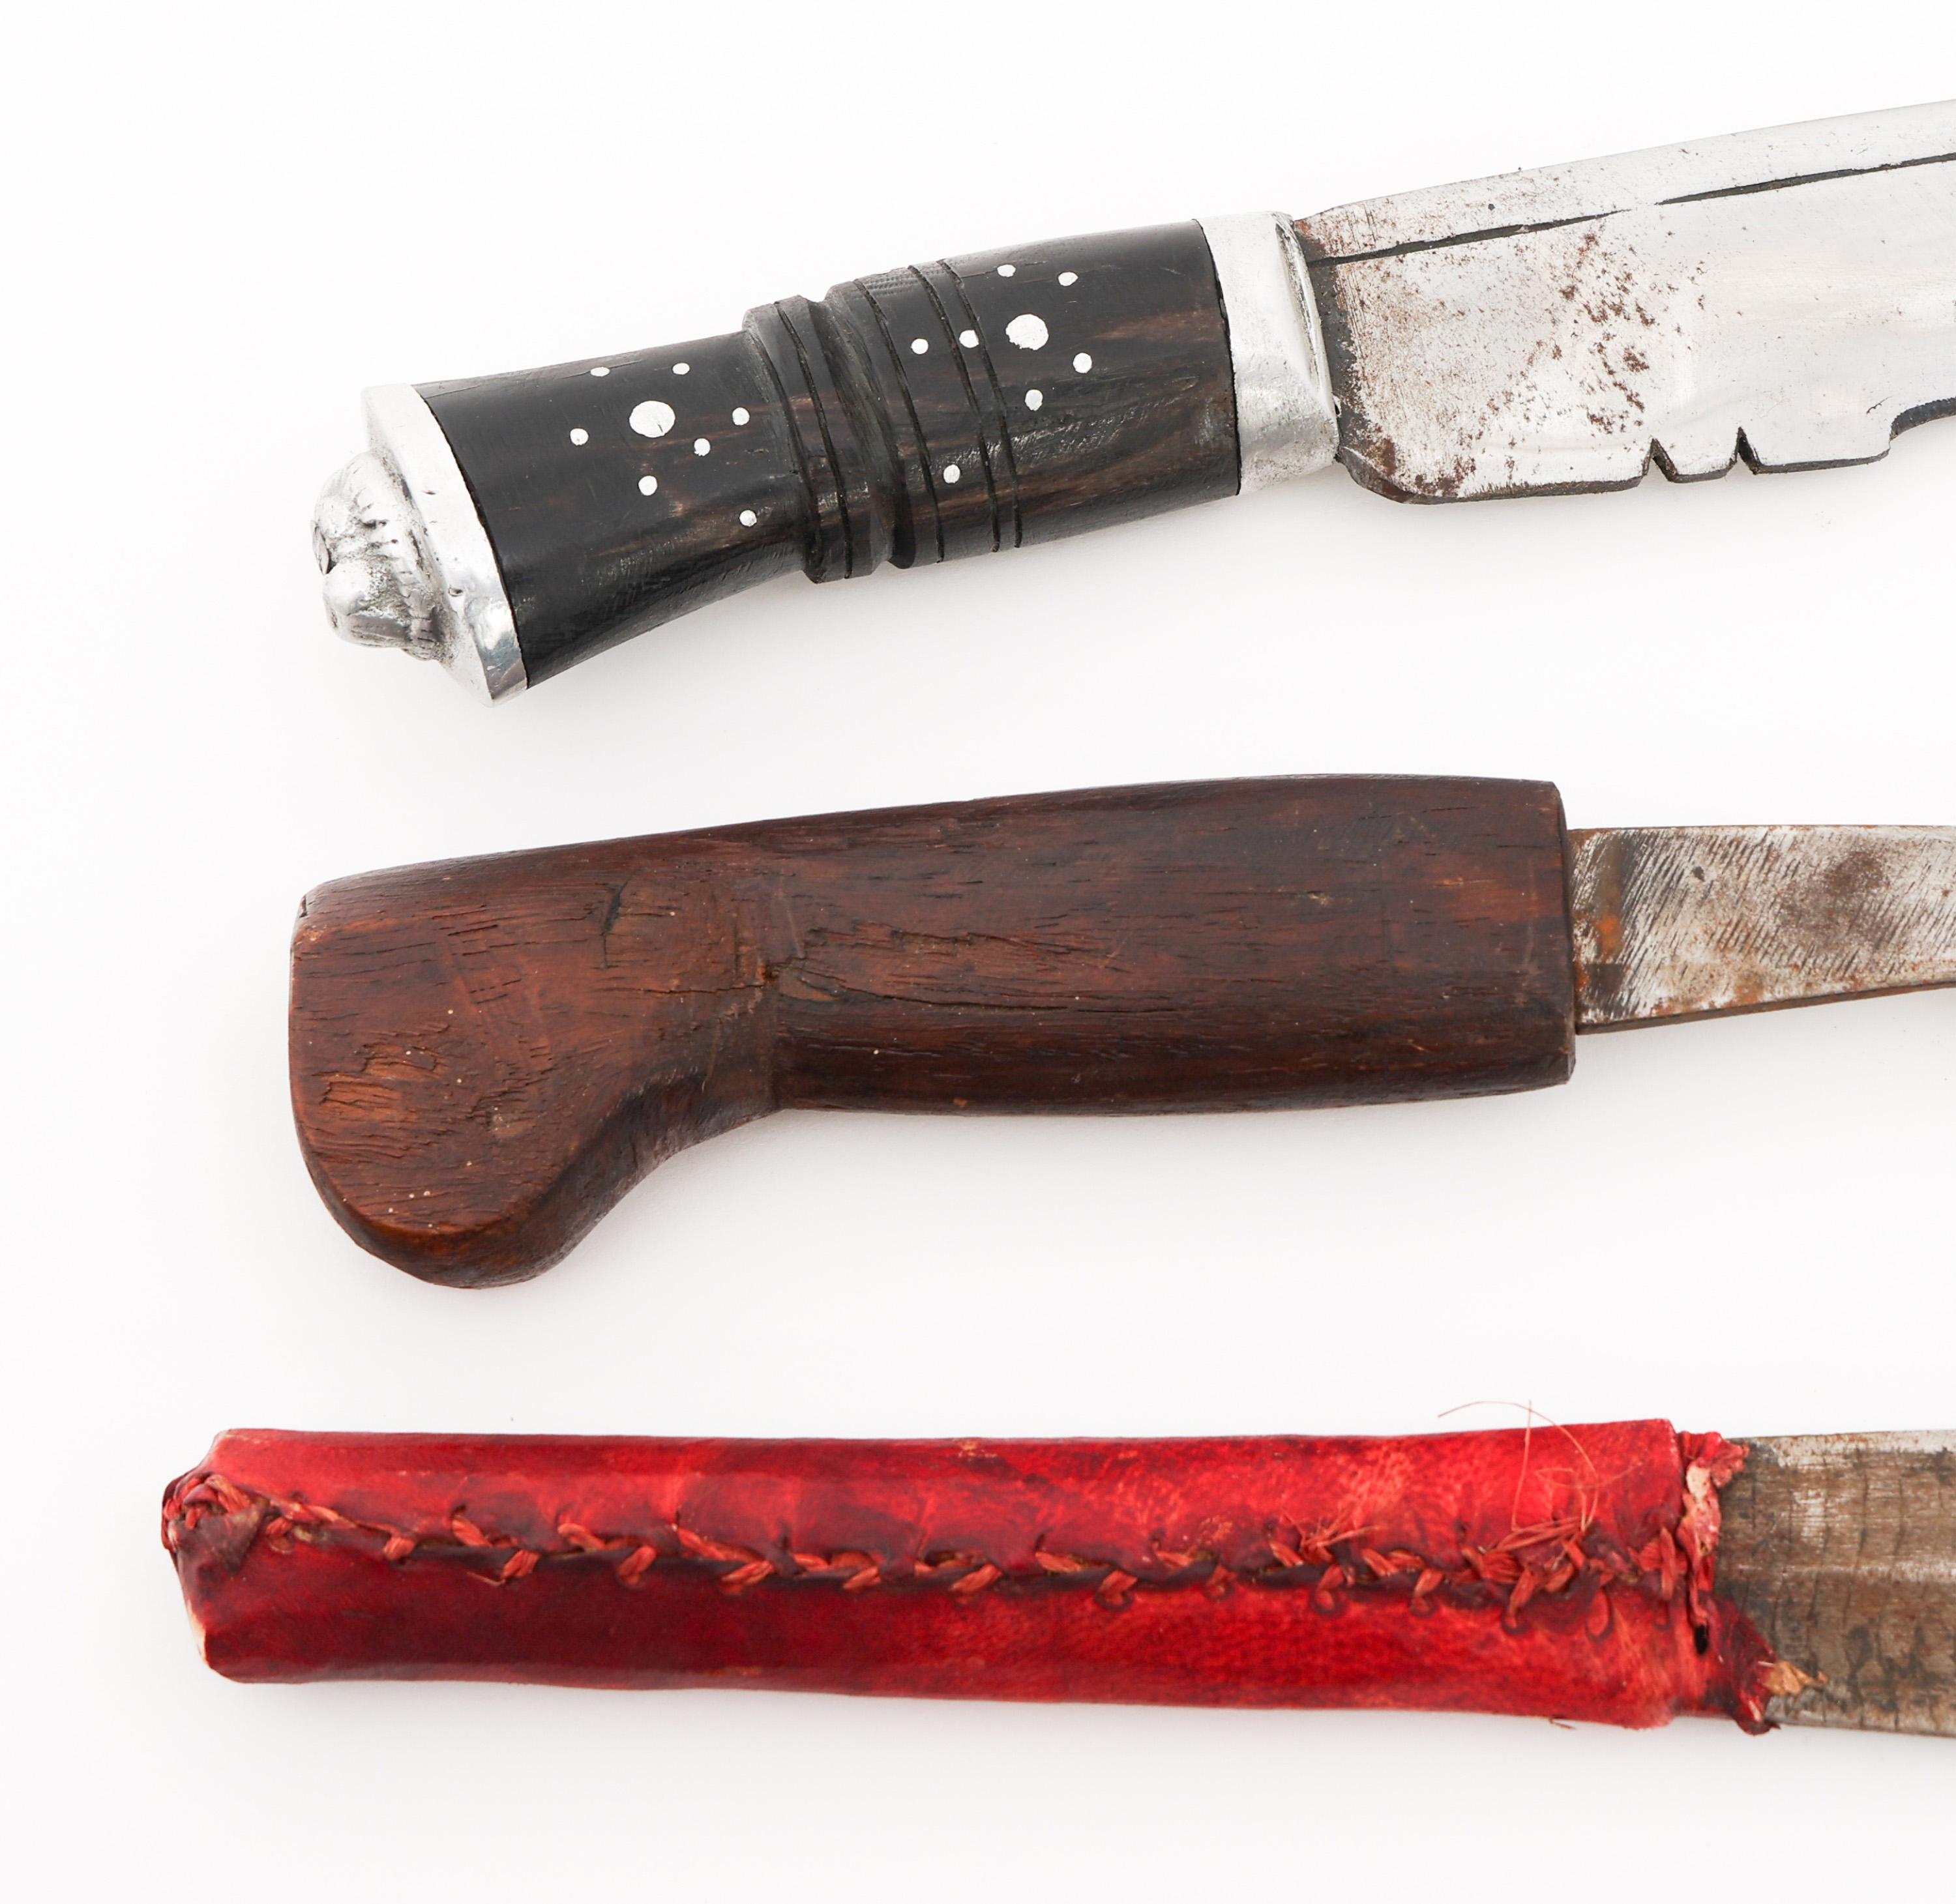 NEPALESE, AFRICAN & PHILIPPINE FIGHTING KNIVES